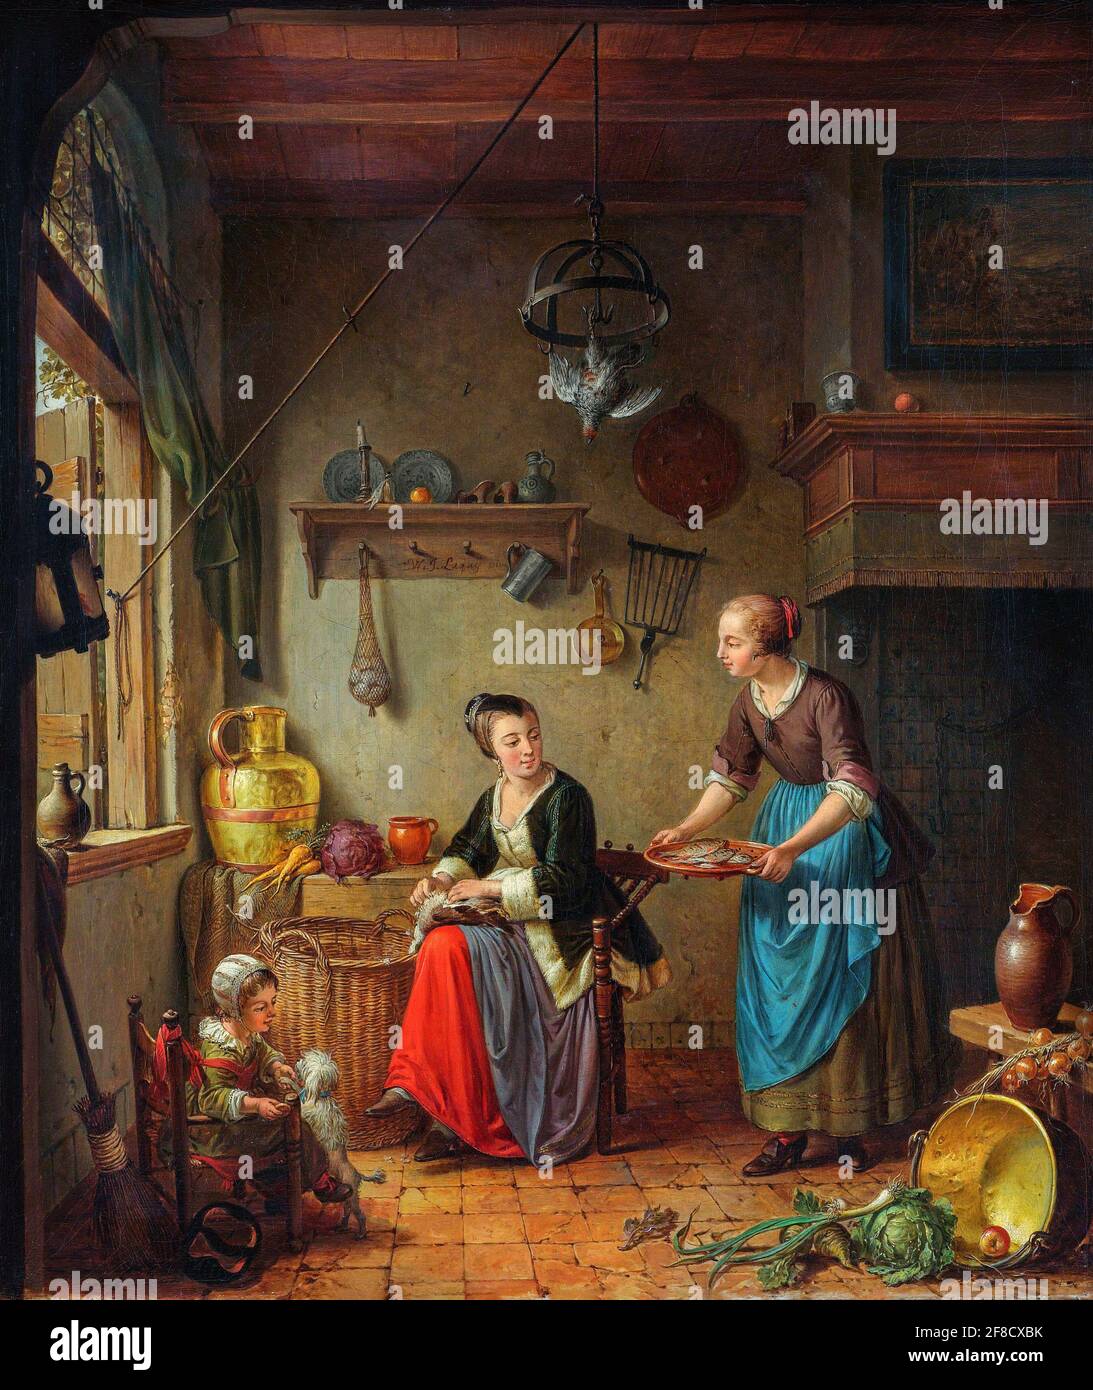 Interior of a kitchen, in the center a young woman is sitting by a basket picking a partridge. On the right, a kitchen maid comes up with a tray of fi Stock Photo